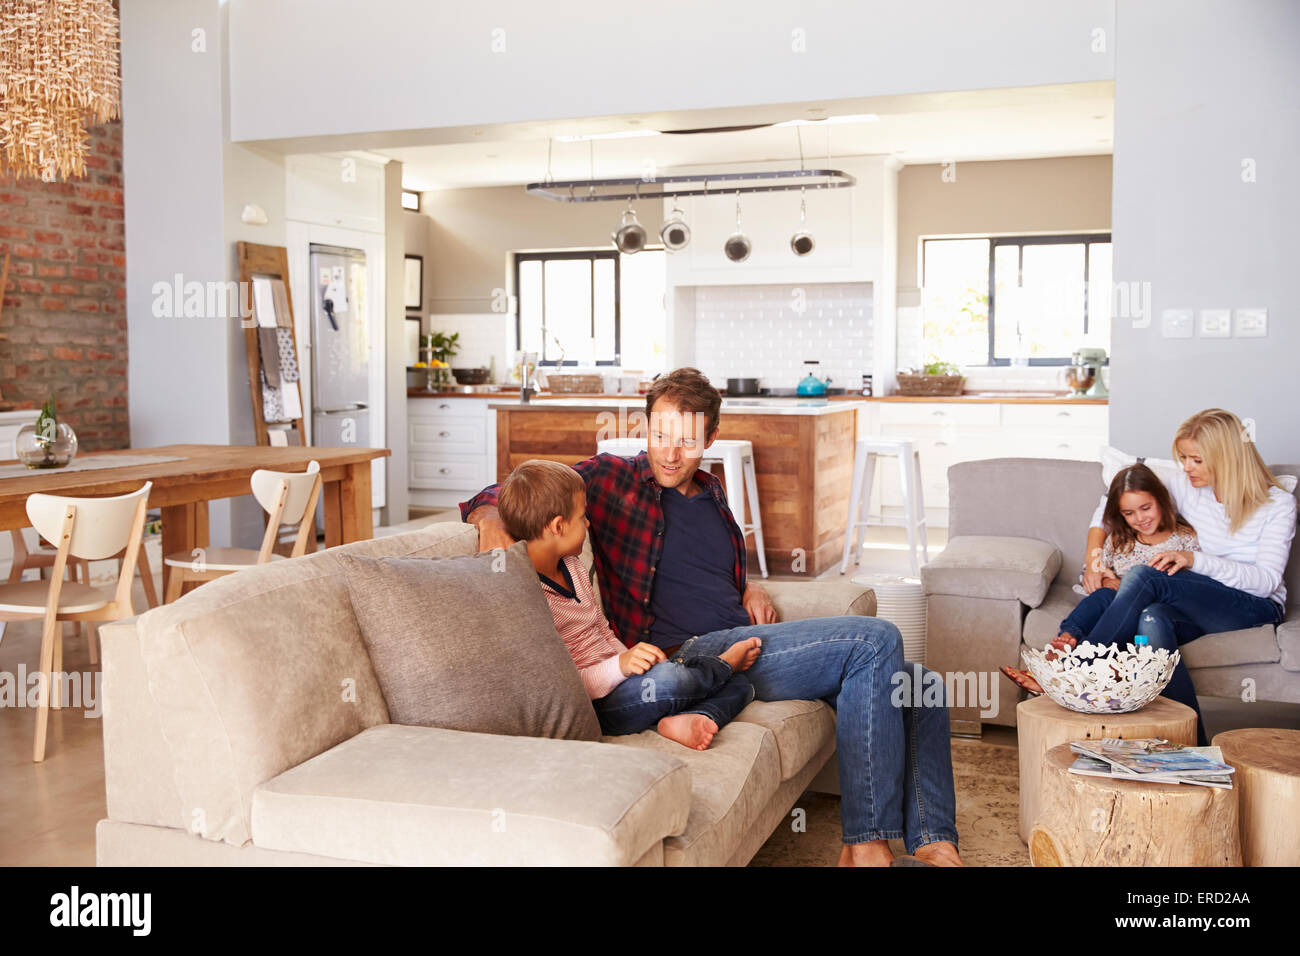 Family spending time together at home Stock Photo